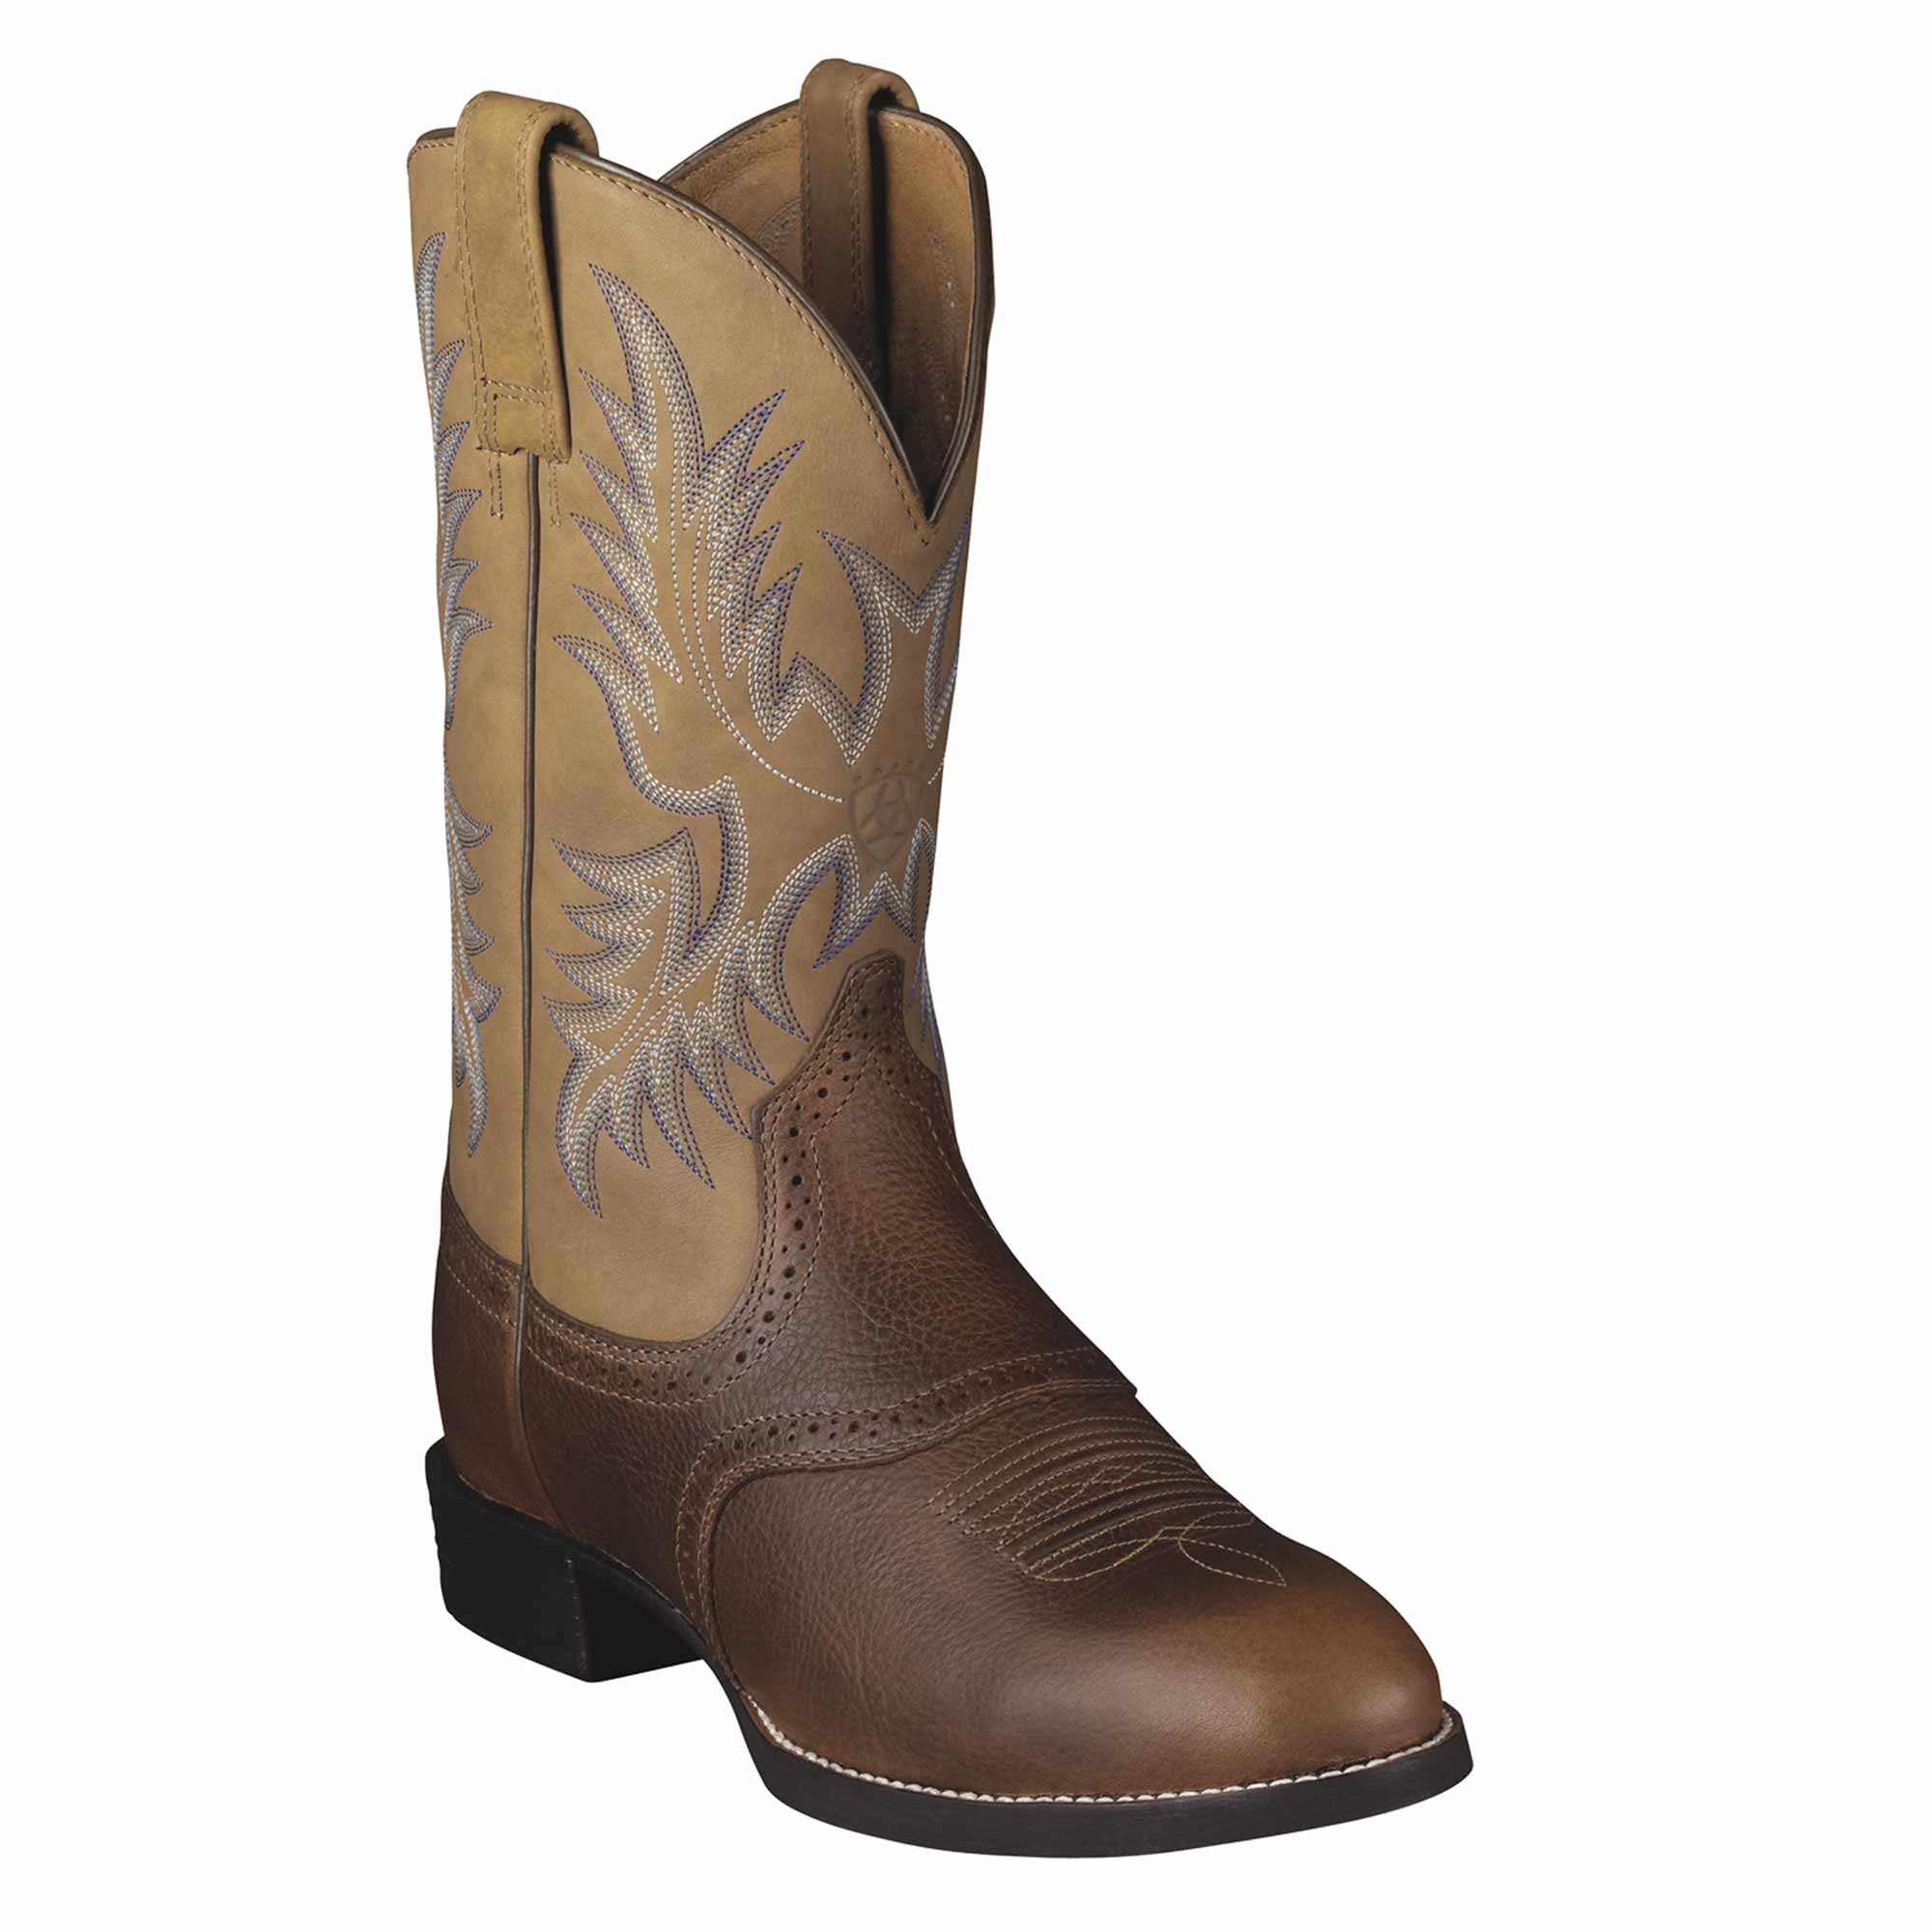 Ariat Mens Heritage Stockman Western Cowboy Boot Boots Shoes